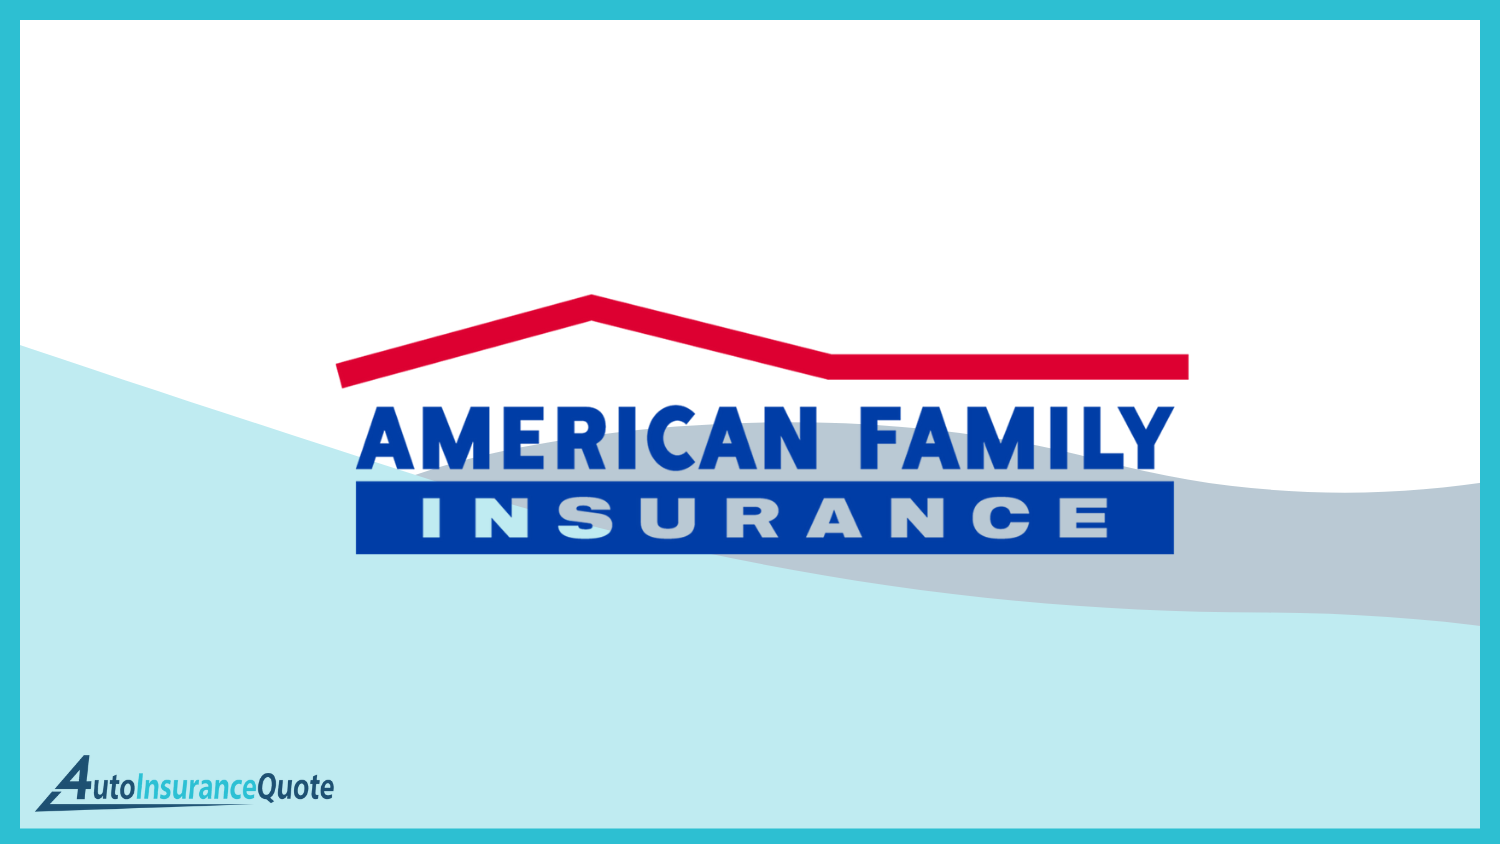 American family Best Auto Insurance Companies That Do Not Monitor Your Driving